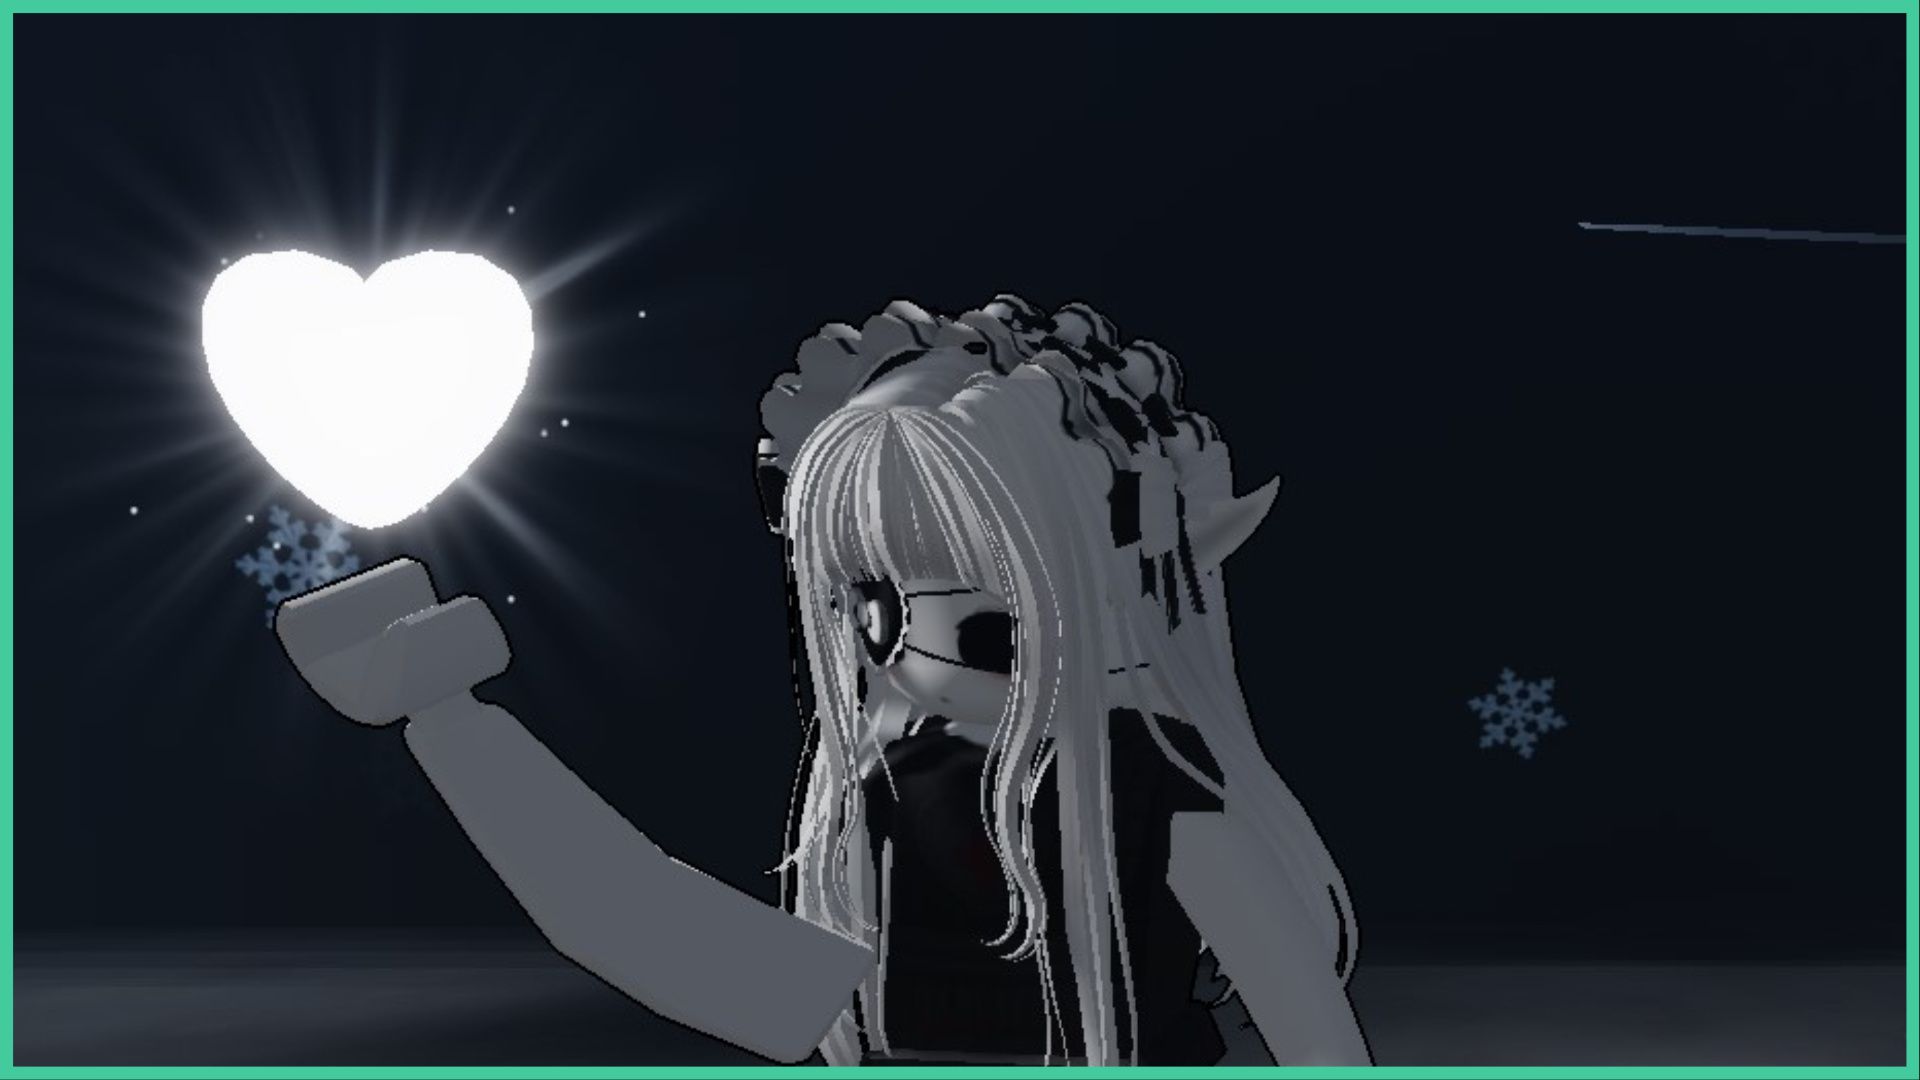 feature image for our underworld realm tier list, the image features a screenshot from the menu screen of a roblox character with an eyepatch, headband and elf ears, raising her hand toward a glowing floating heart as snowflakes fall in the background